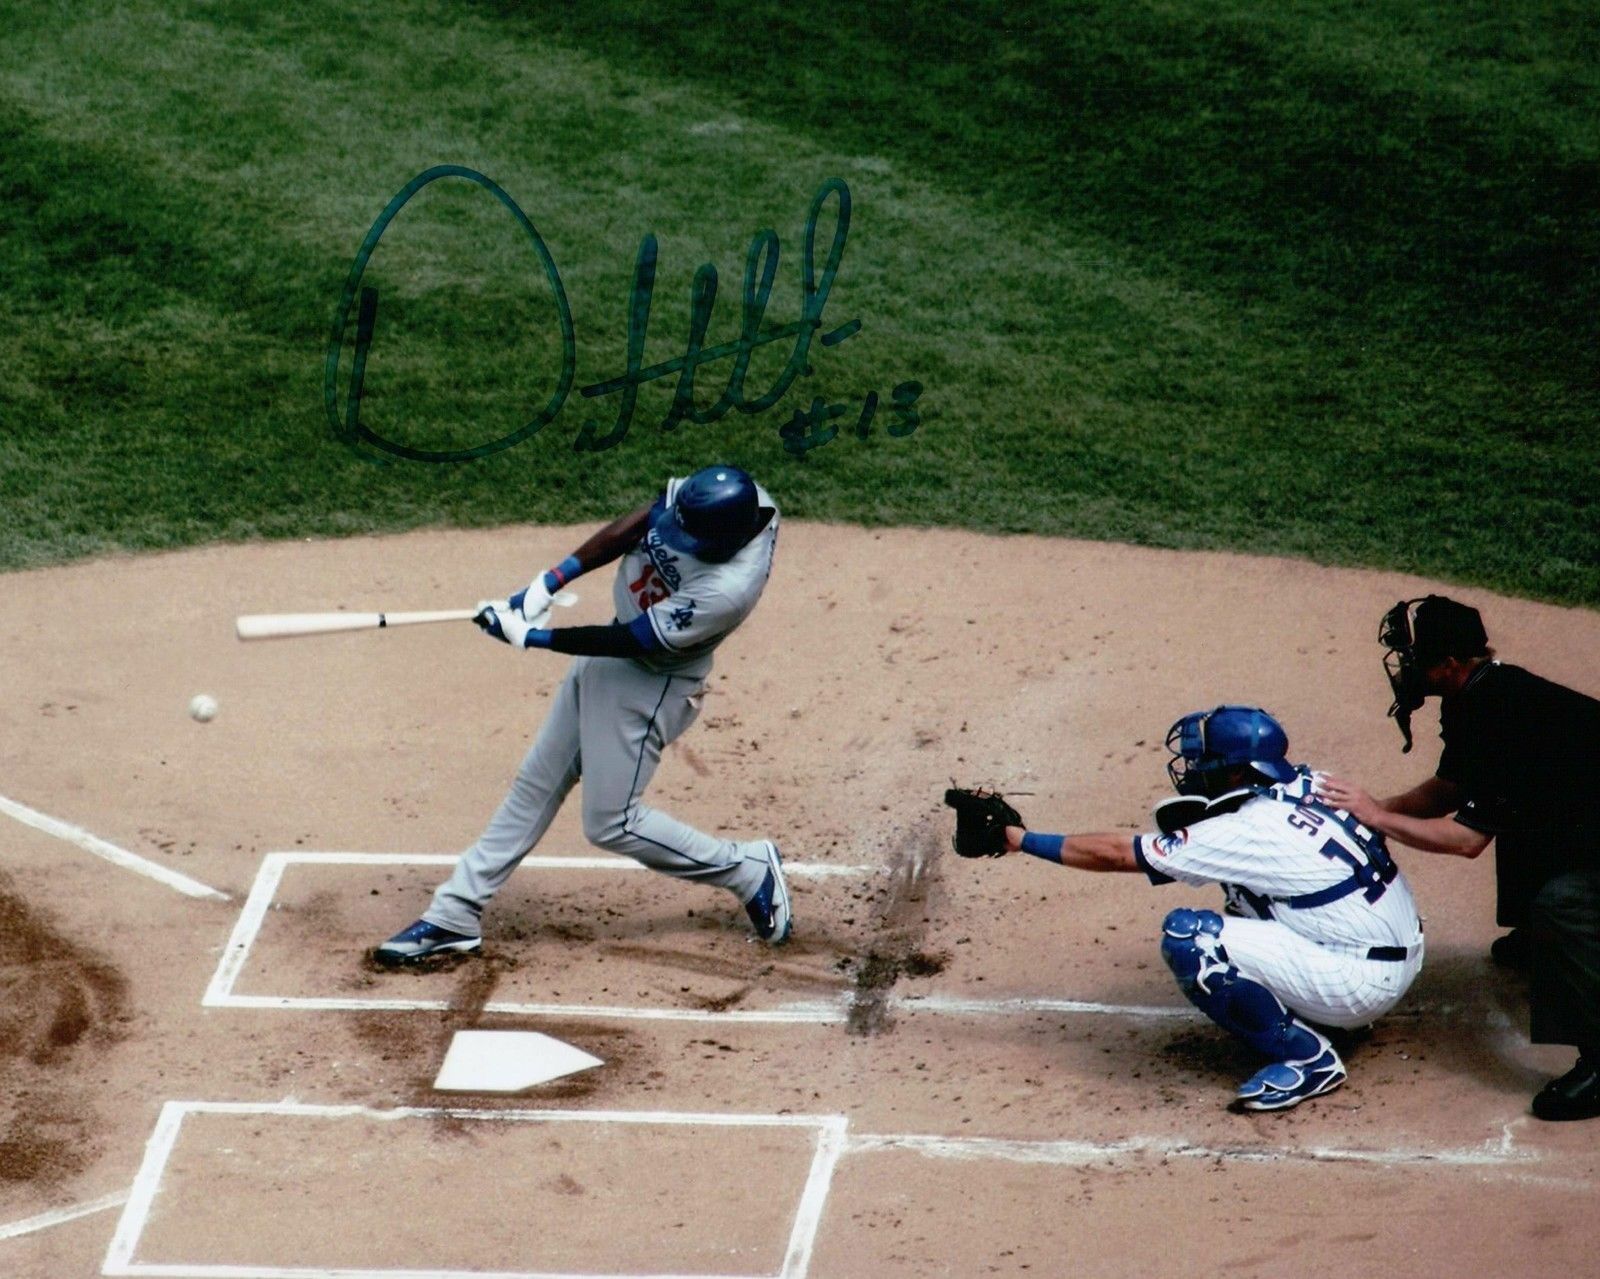 Orlando Hudson Signed 8X10 Photo Poster painting Autograph LA Dodgers At the Plate High Auto COA